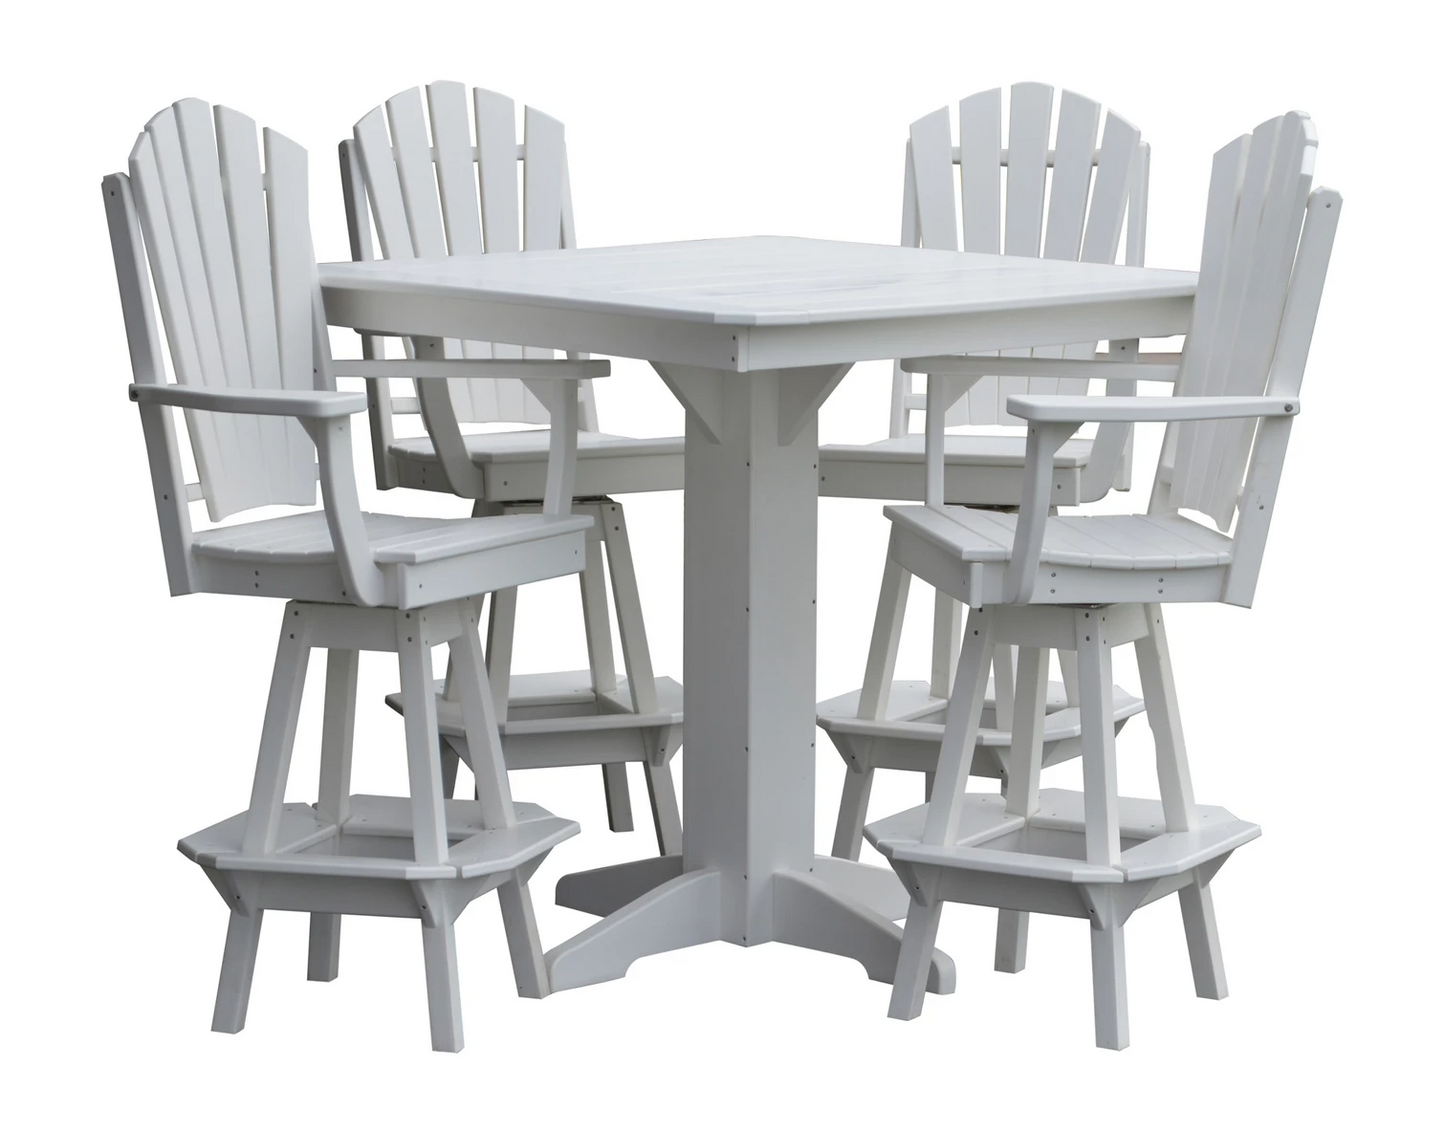 A&L Furniture Recycled Plastic 5 Piece Bar Height Square Table Set - White